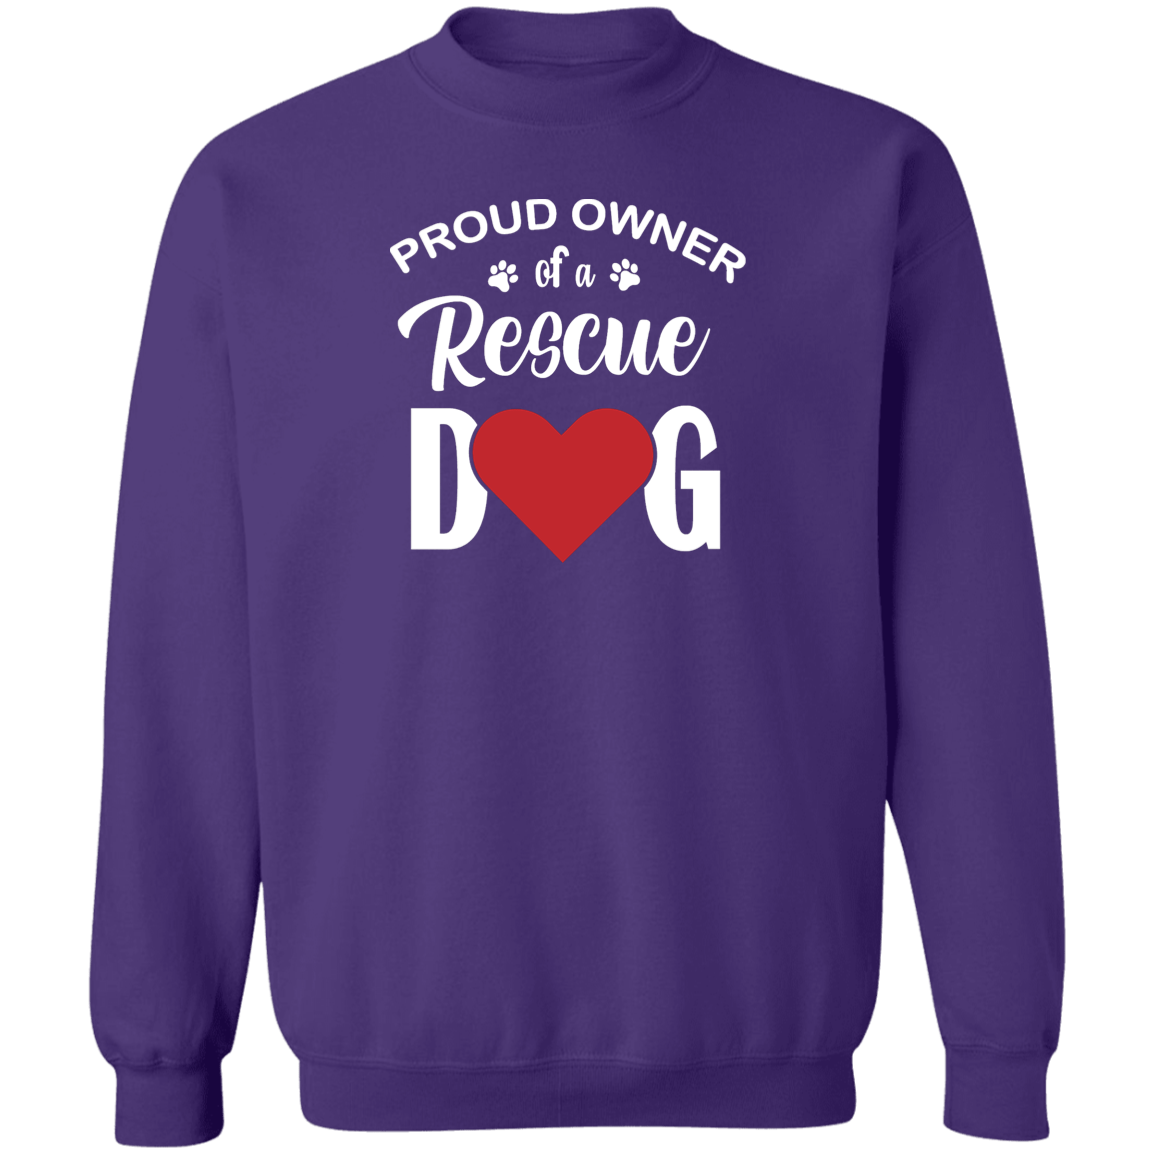 Proud Owner Of A Rescue Dog - Sweatshirt.